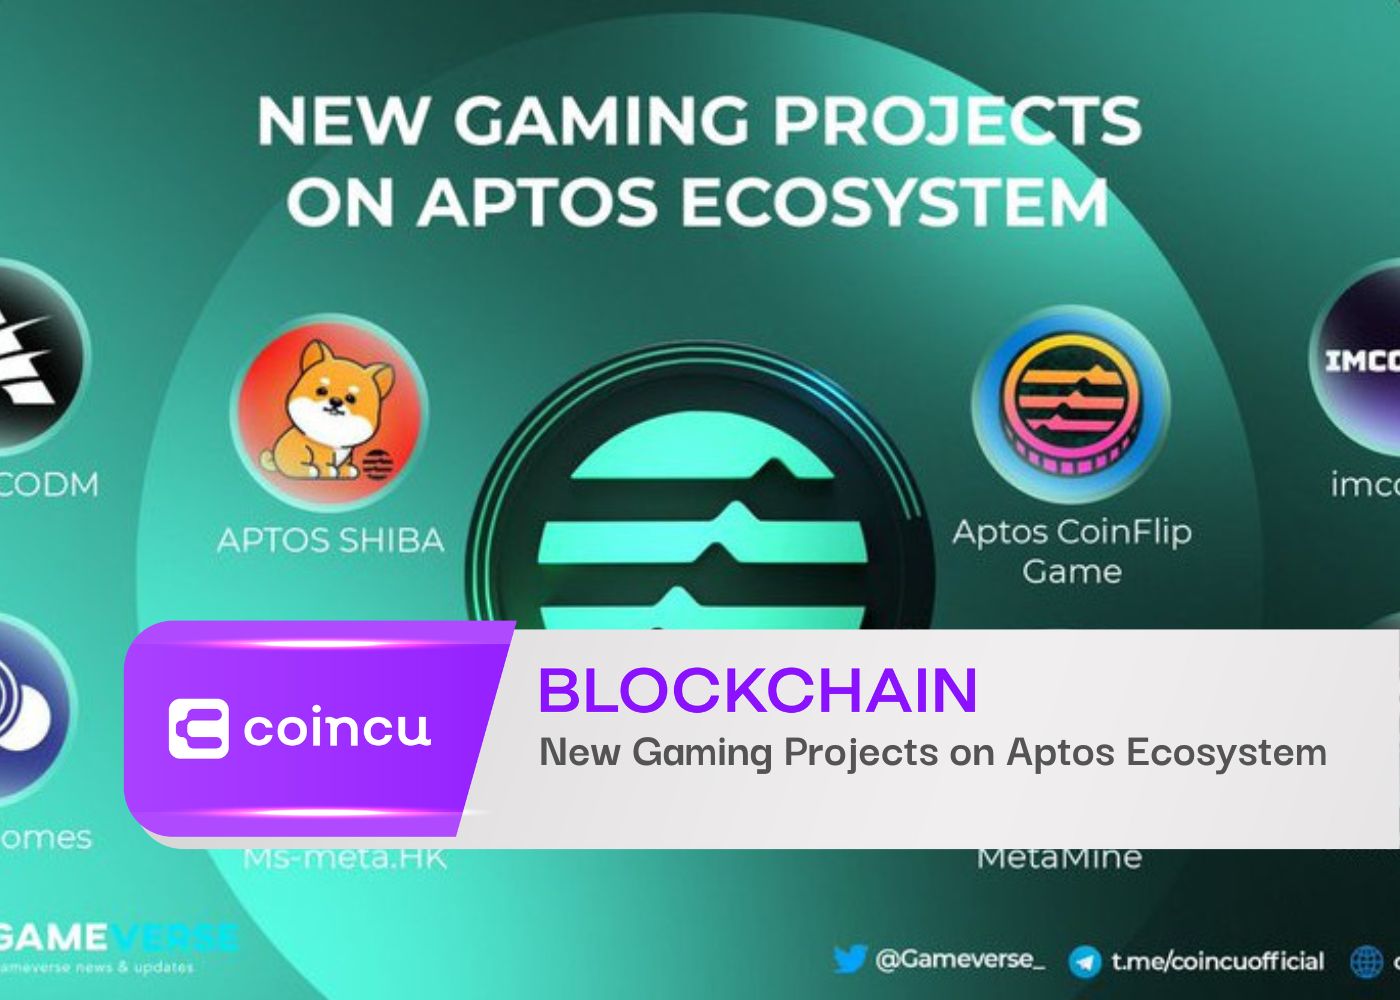 New Gaming Projects on Aptos Ecosystem